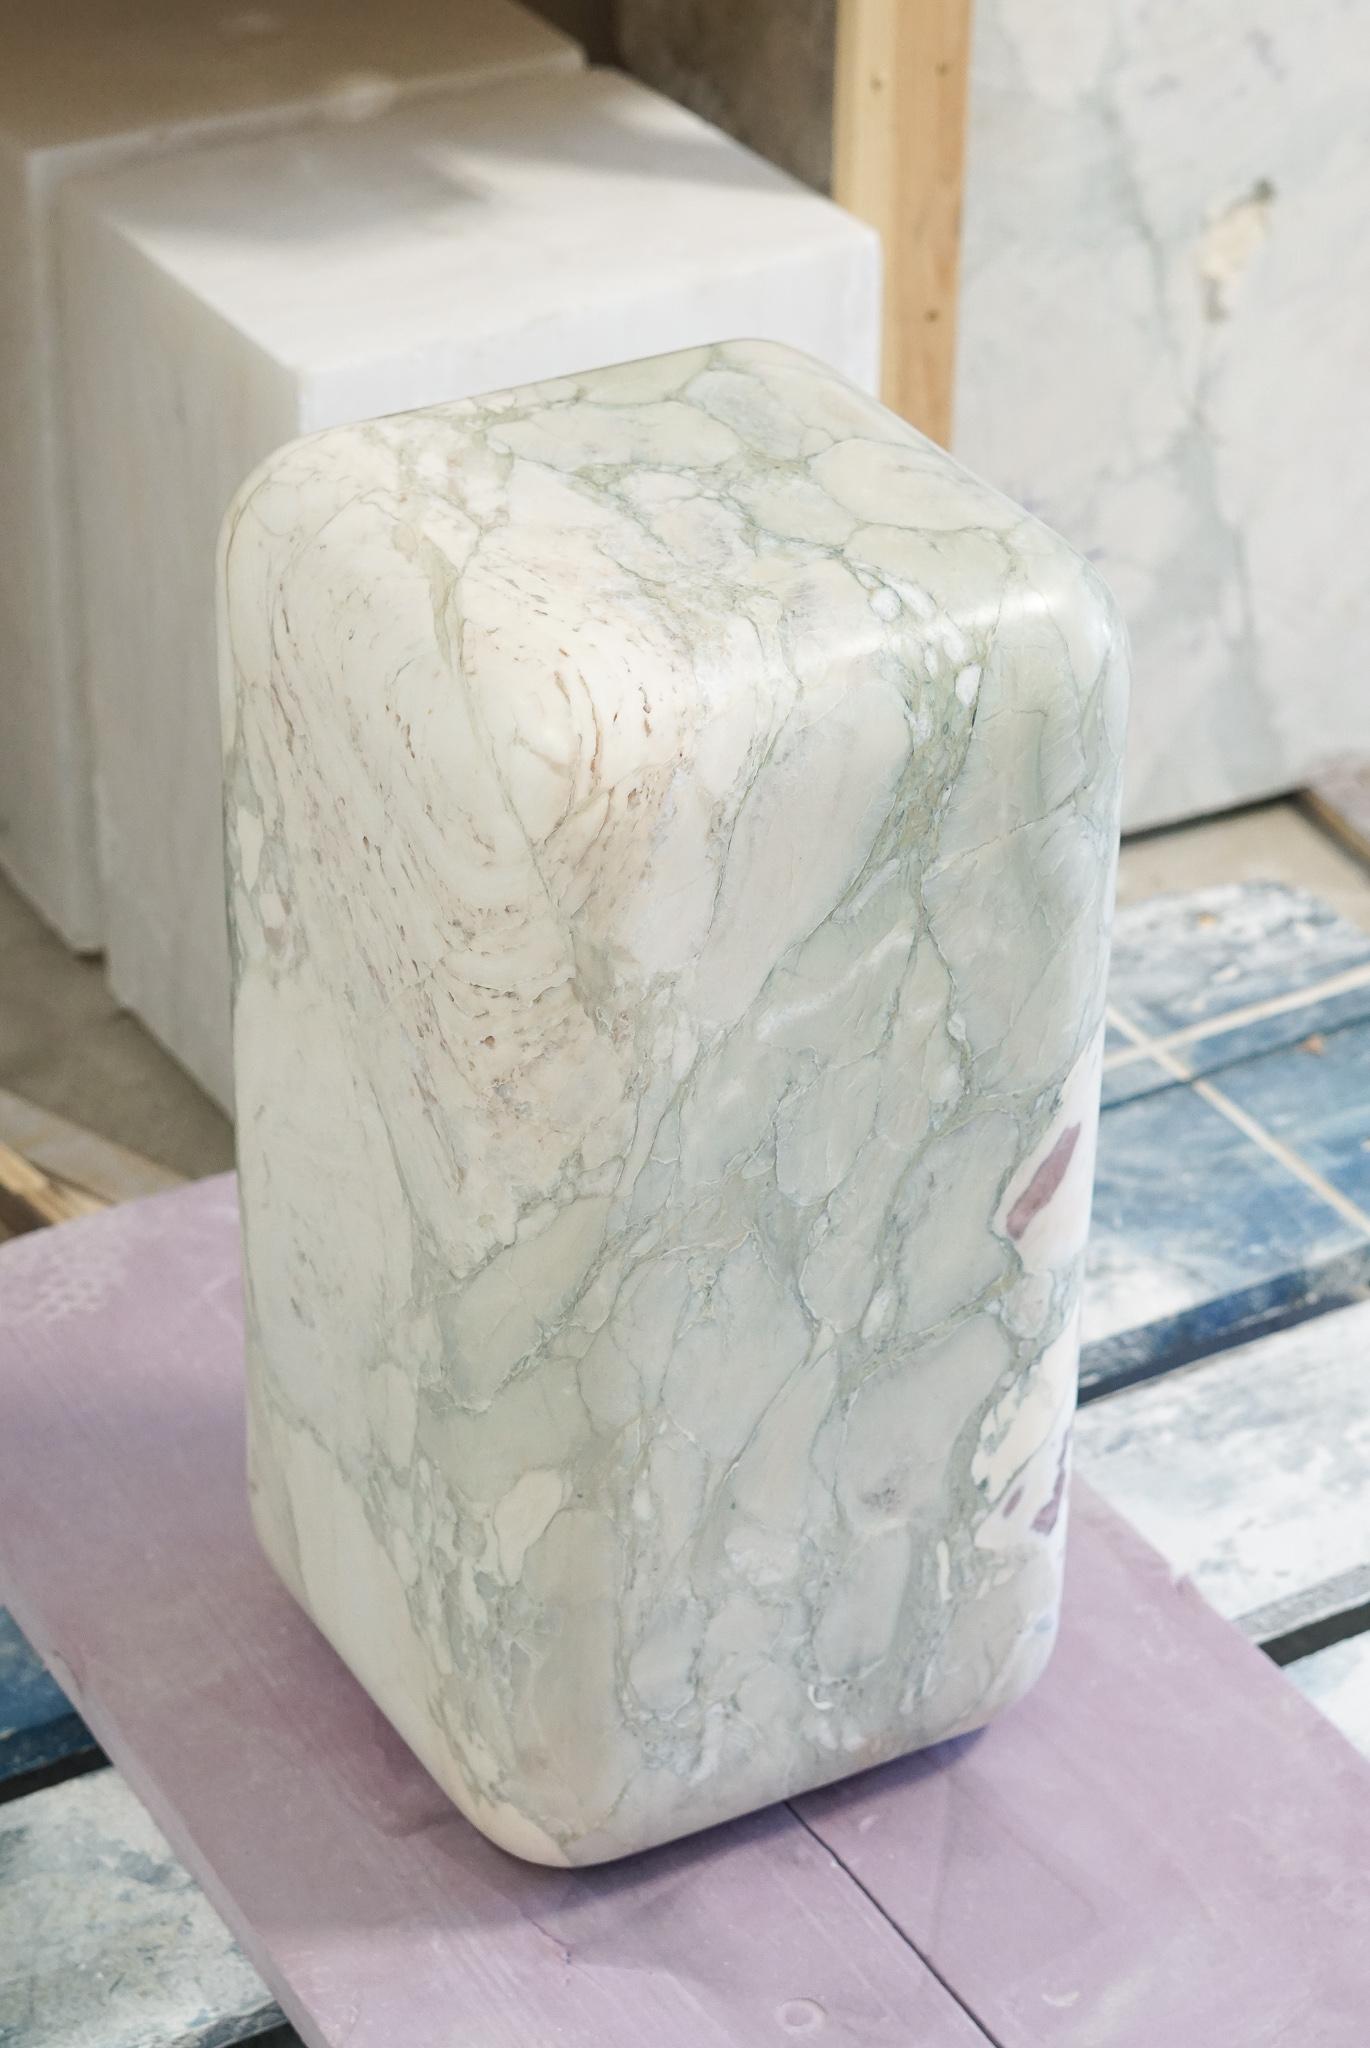 Chunk squared side table by Swell Studio
Dimensions: D31 x W31 x H46 cm.
Material: Breccia Stazzema, Alabaster

A squared version of our chunk side table. The unique coloration and veining in the blocks are the focal point of this simple yet